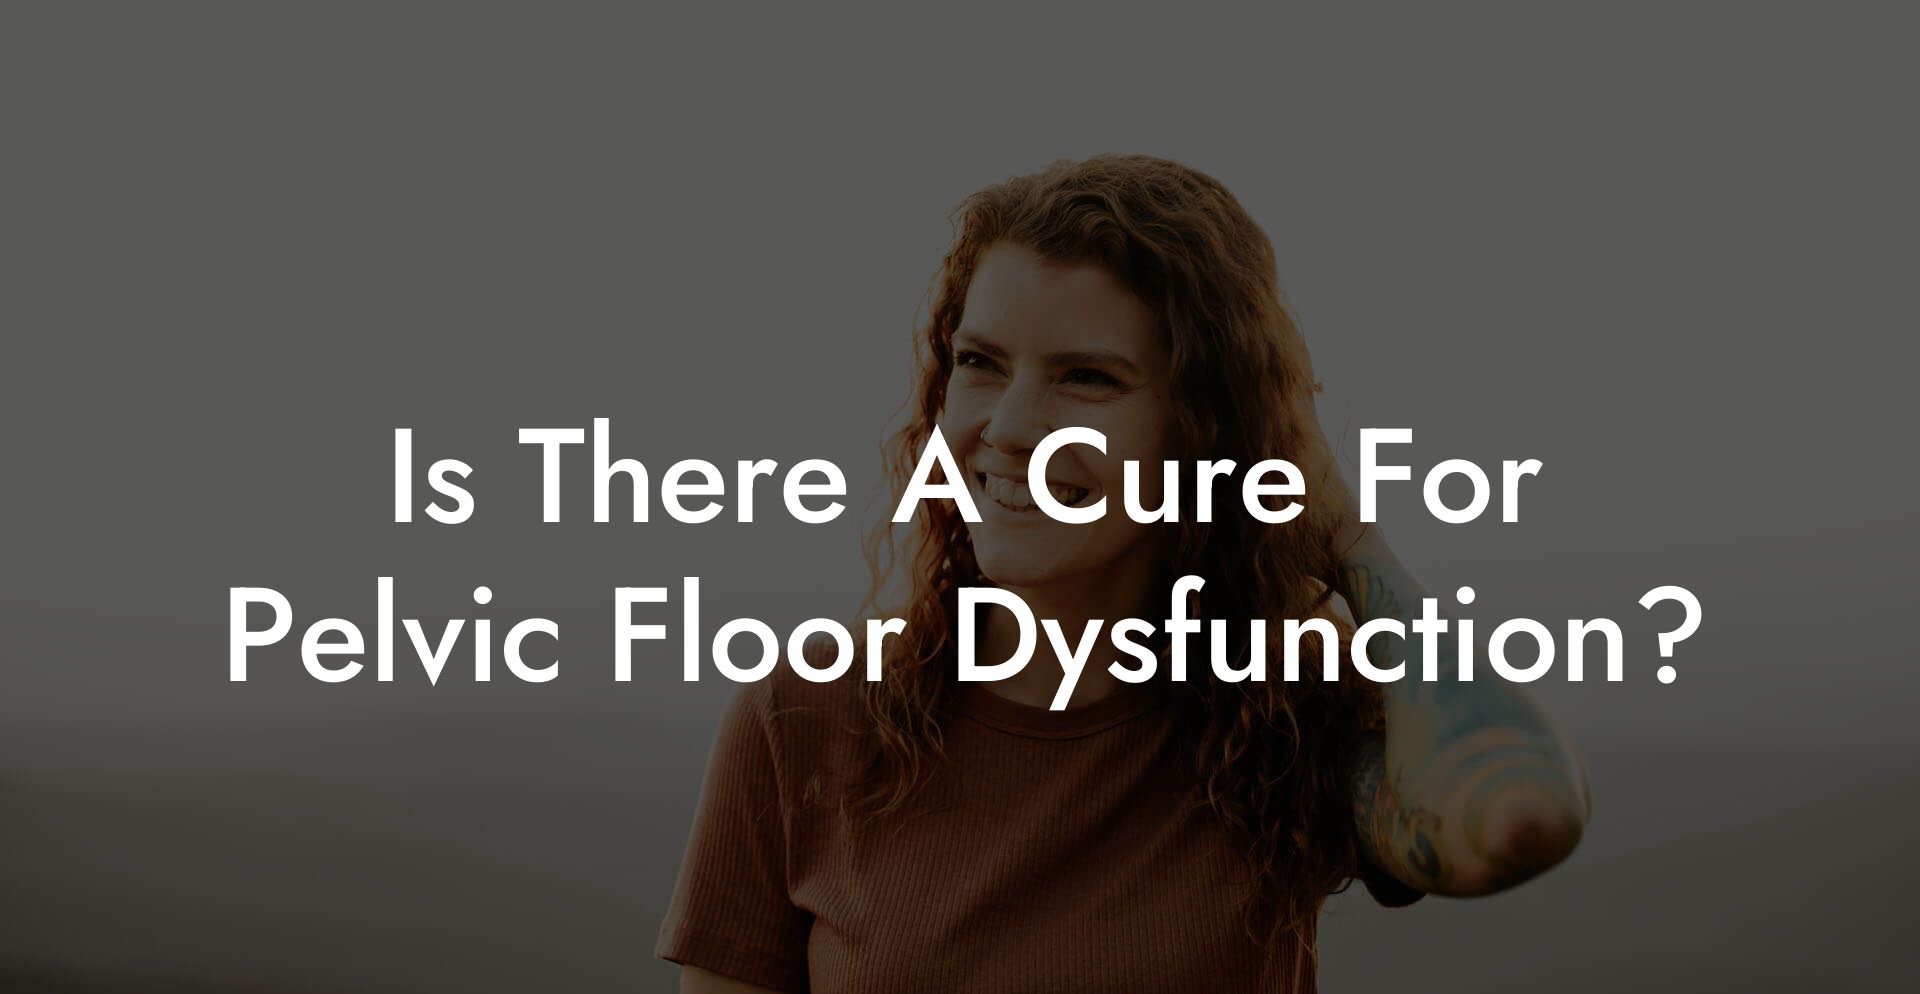 Is There A Cure For Pelvic Floor Dysfunction?